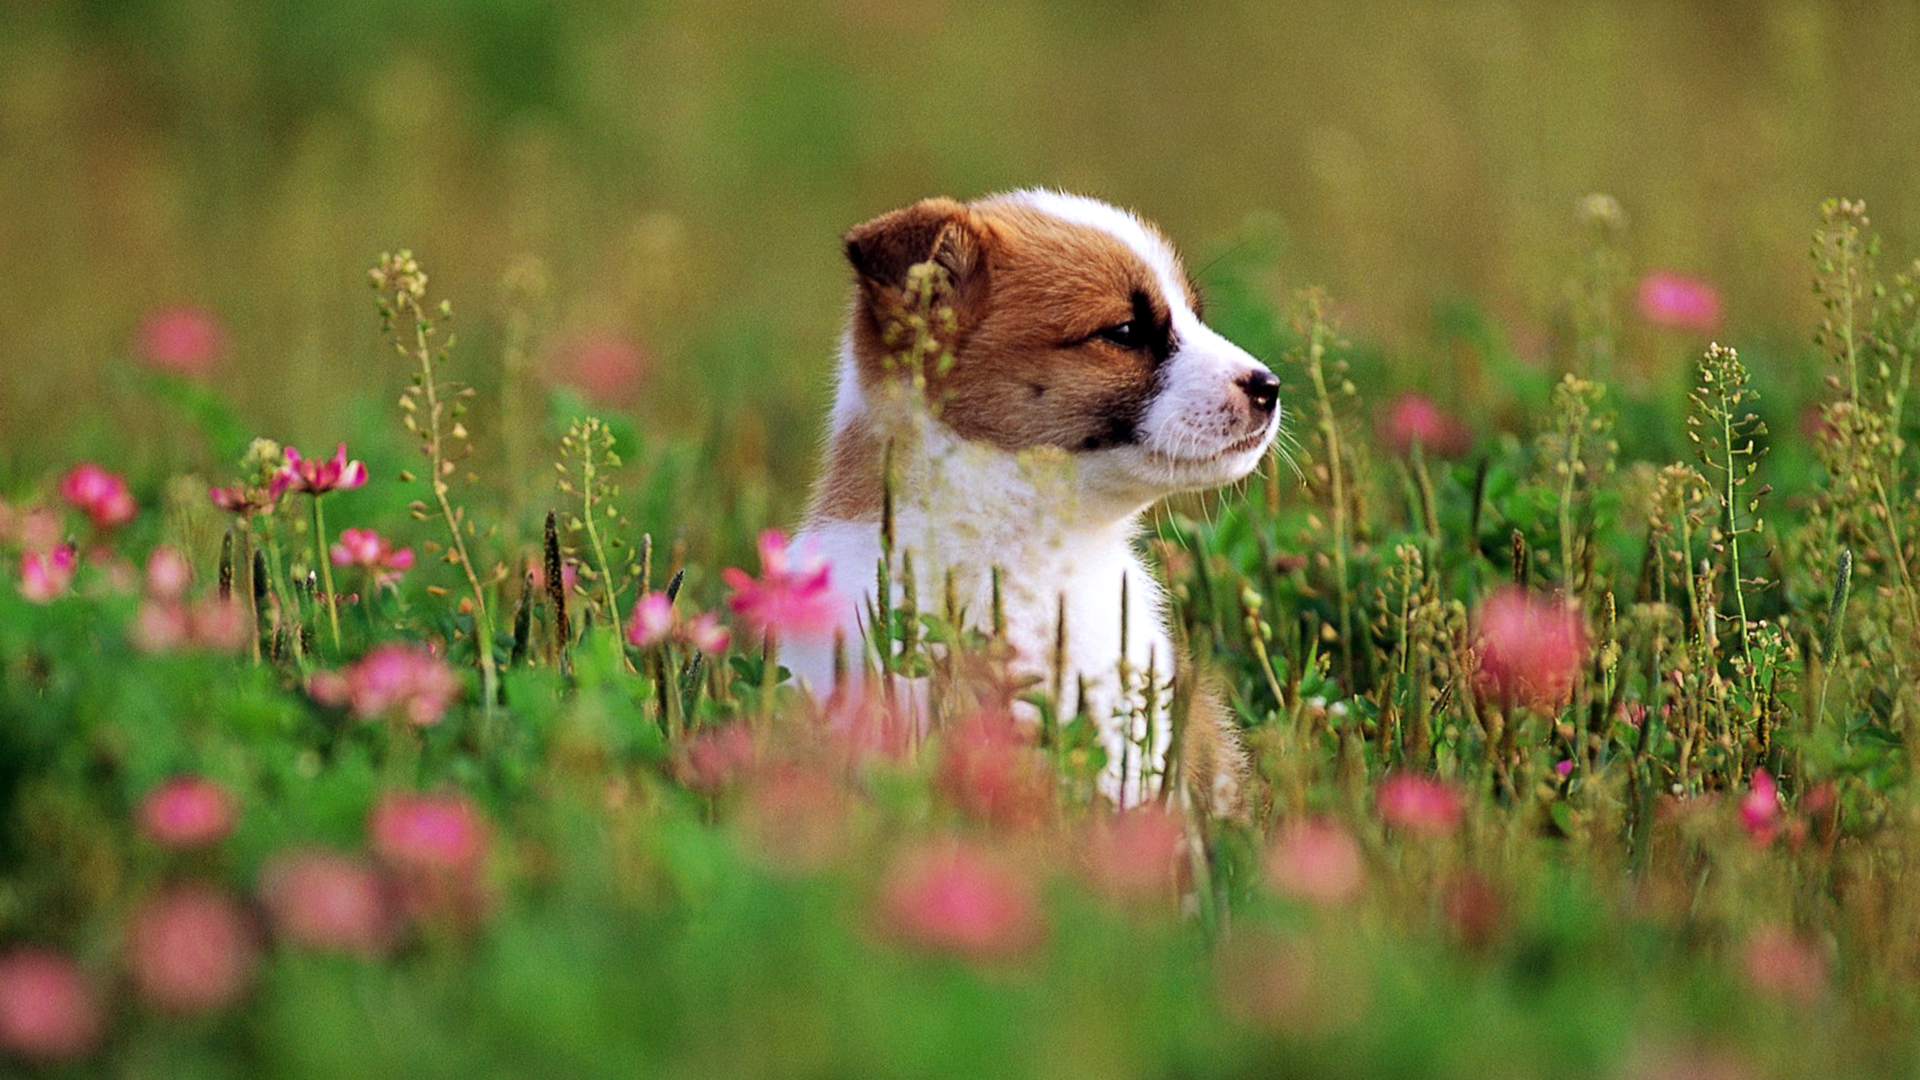 Cute Puppy Dog In The Park Wallpaper